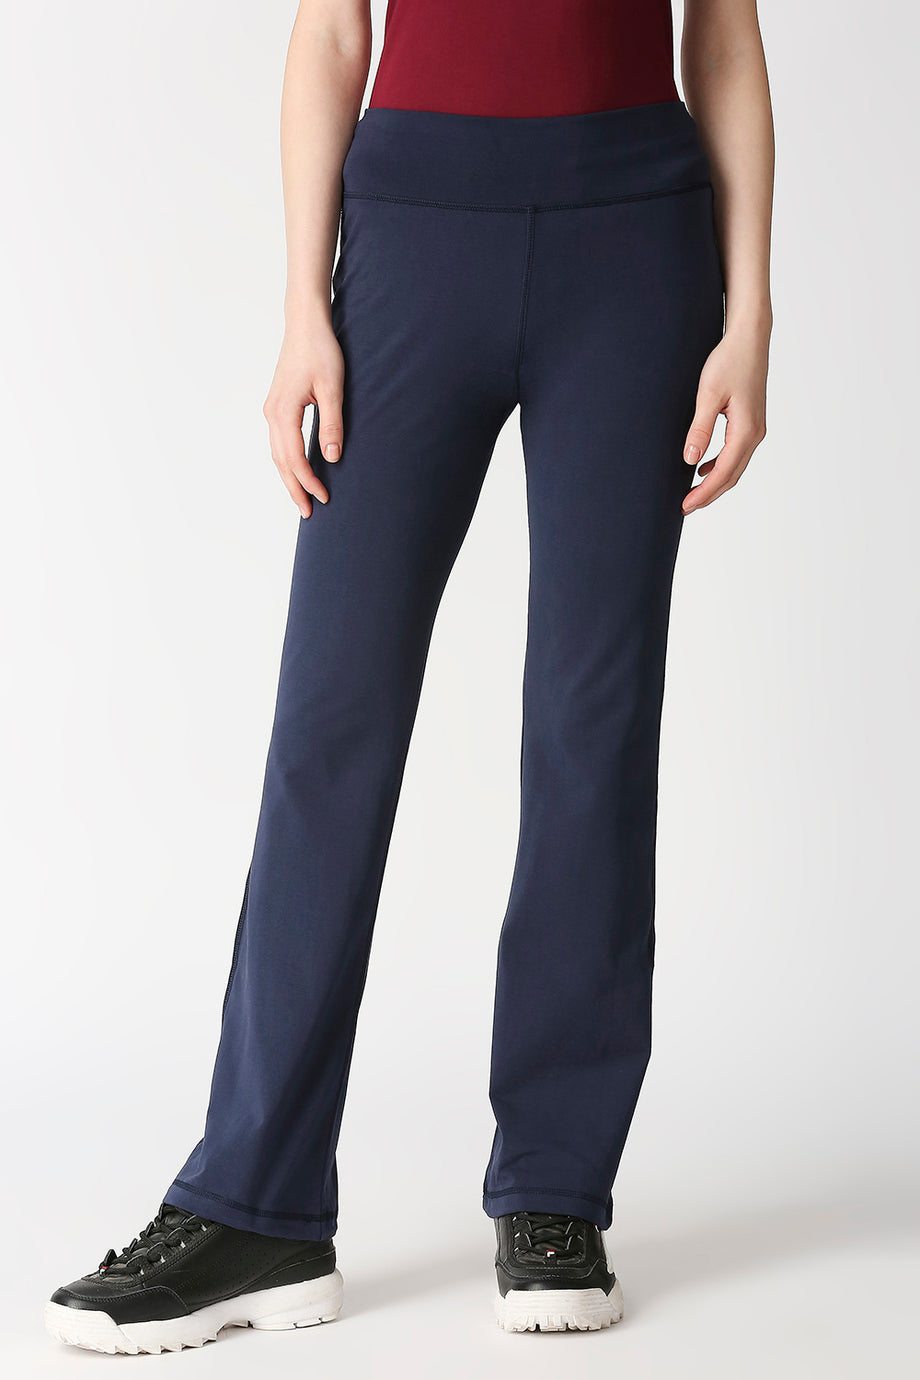 Buy Best Selling Women Track Pants Online Ultimate Cotton Loungepants With  Pockets  Cupid Clothings